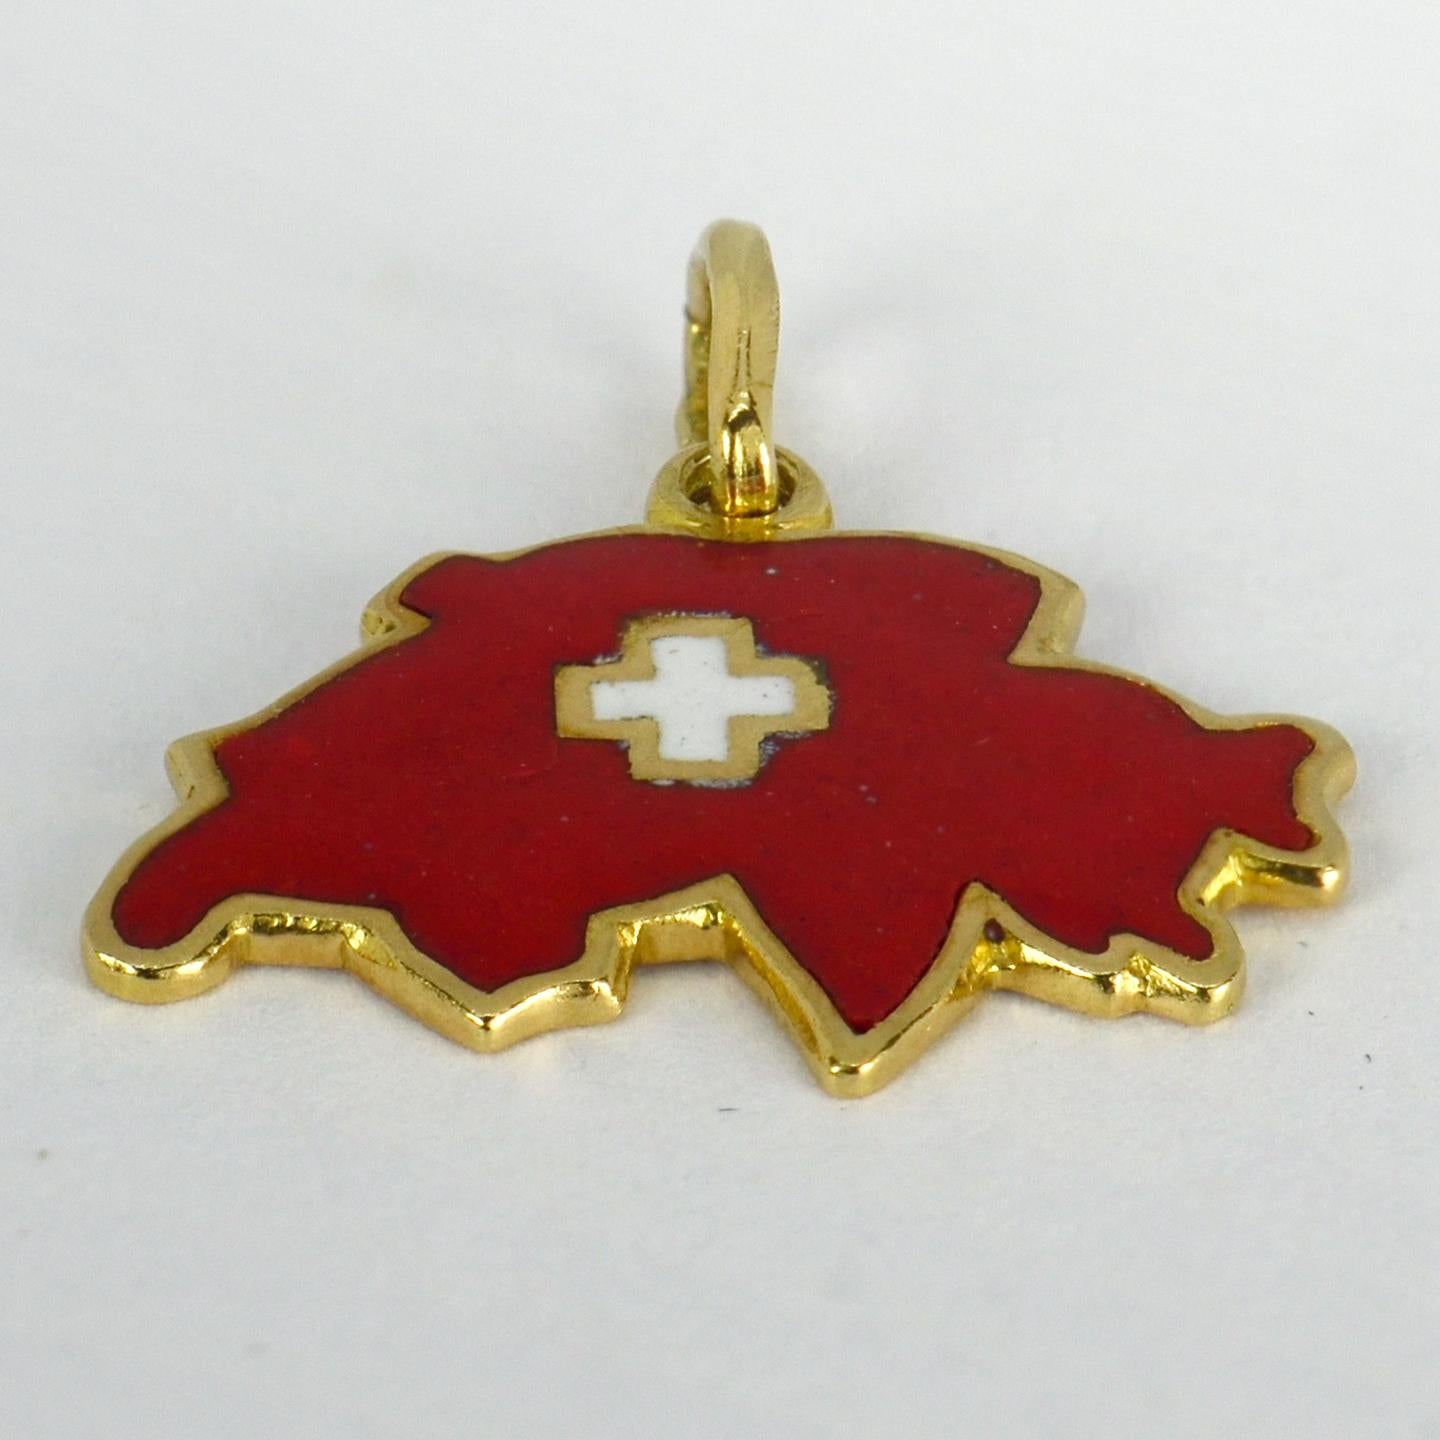 An 18 karat (18K) yellow gold charm pendant designed as a map of Switzerland with white and red enamel. Stamped 750 for 18 karat gold.

Dimensions: 1.1 x 2.1 x 0.1 cm (not including jump ring)
Weight: 2.31 grams
